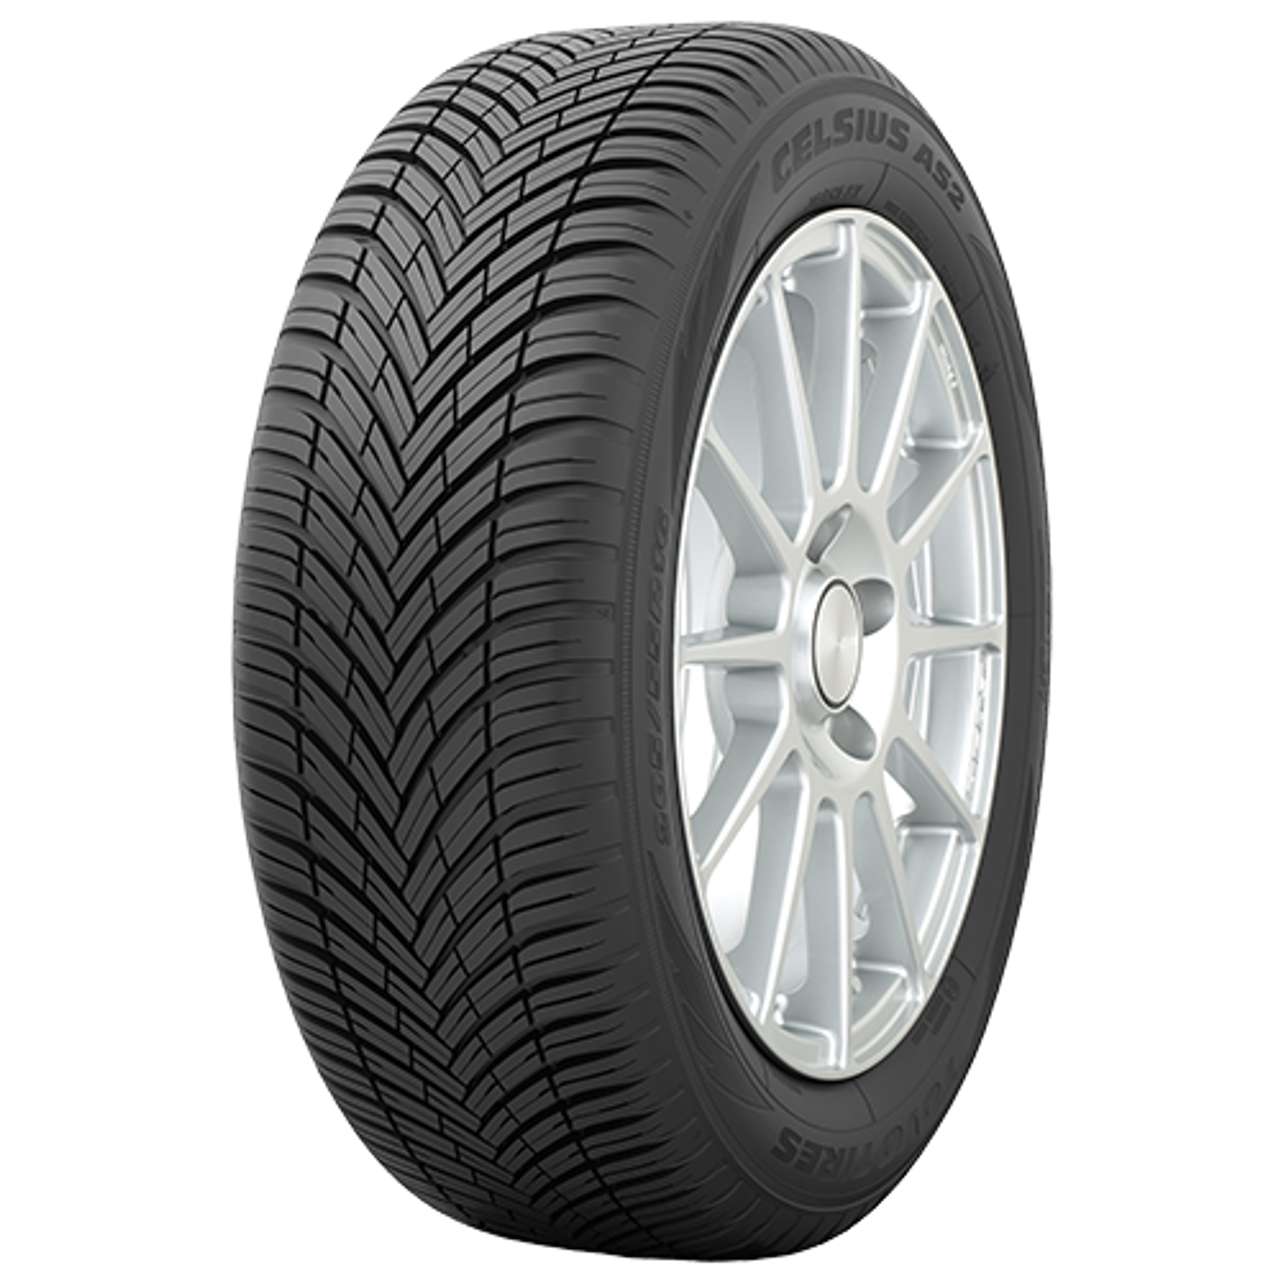 TOYO CELSIUS AS2 185/55R15 82H BSW